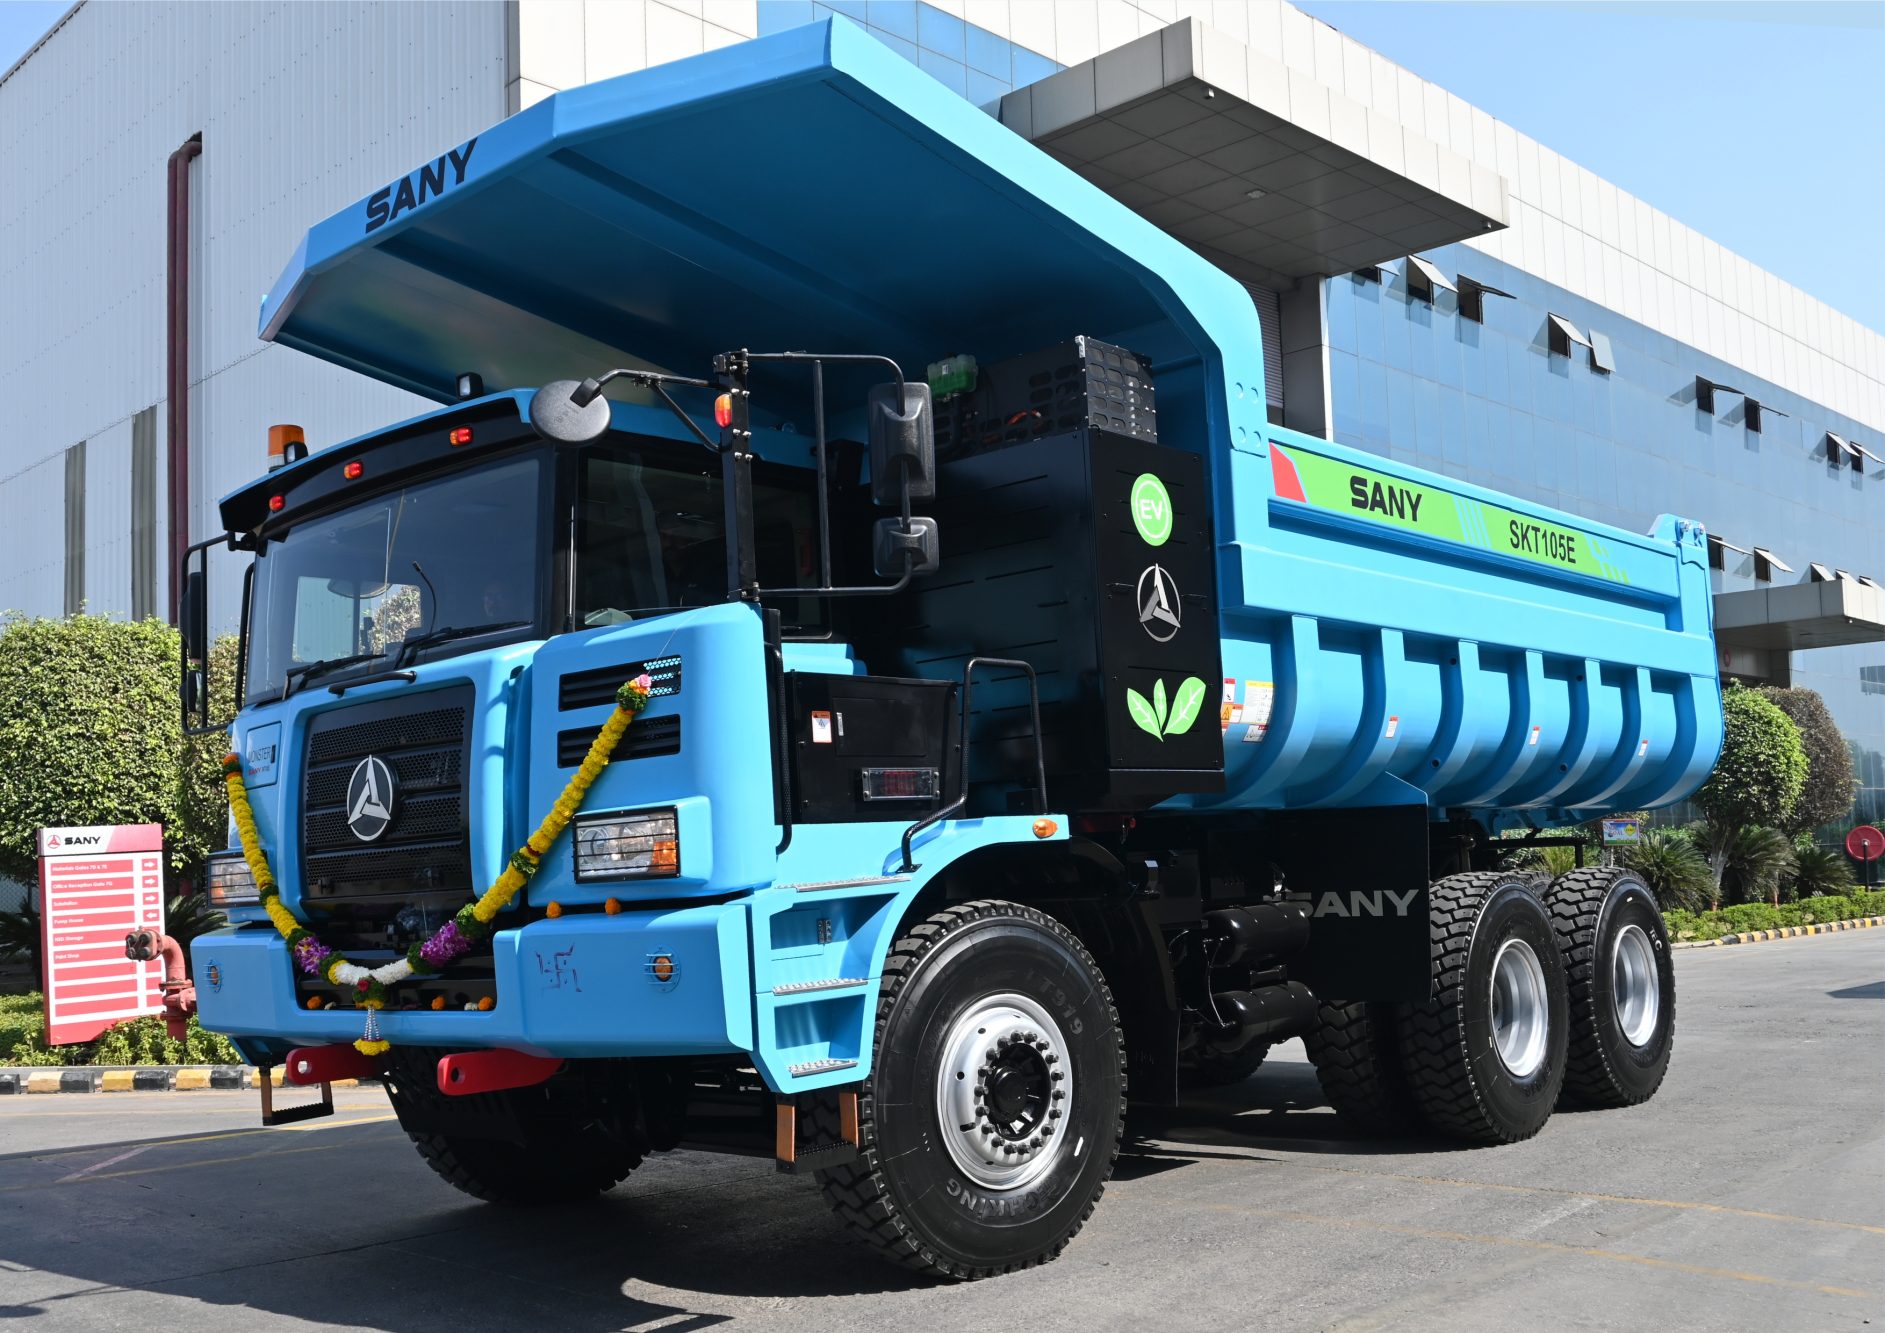 The SKT105E Electric Dump Truck represents a new era in mining technology, combining local expertise with global innovation. Designed to meet the rigorous demands of open-cast mining operations, this fully electric off-highway dump truck boasts exceptional energy efficiency and cost-effectiveness.